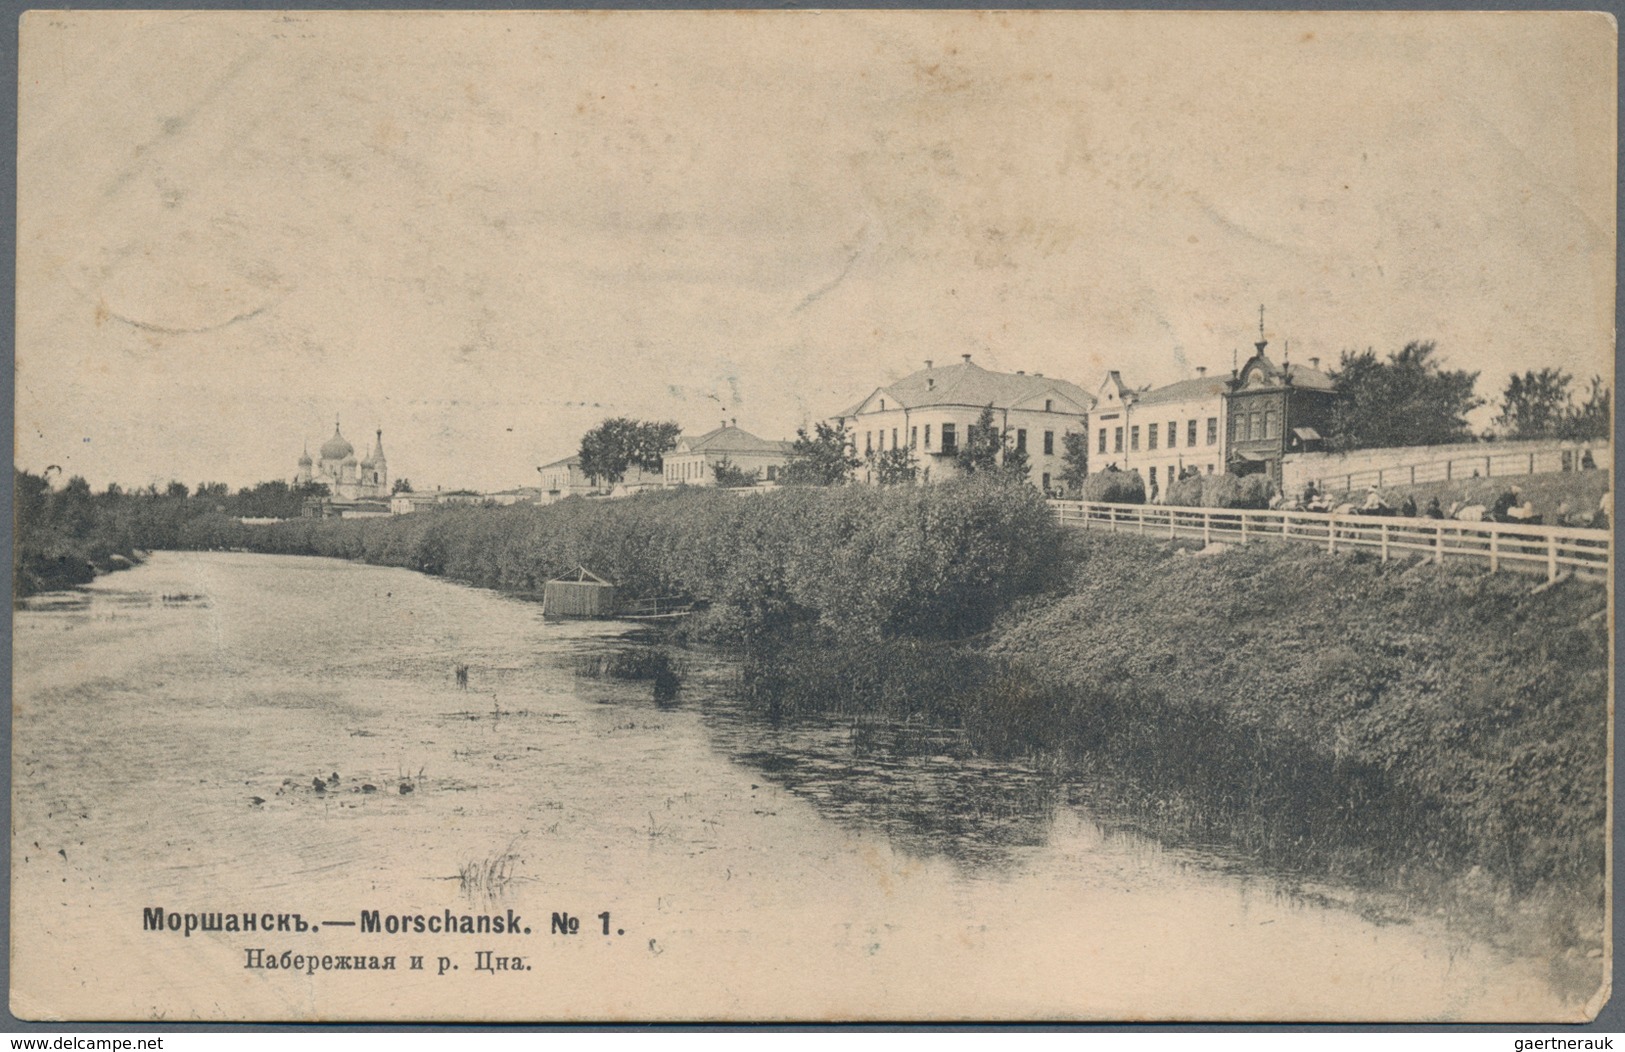 Russische Post In China: 11.11.1904 Russo-Japanese War Picture Postcard With View Of Morshansk Sent - China